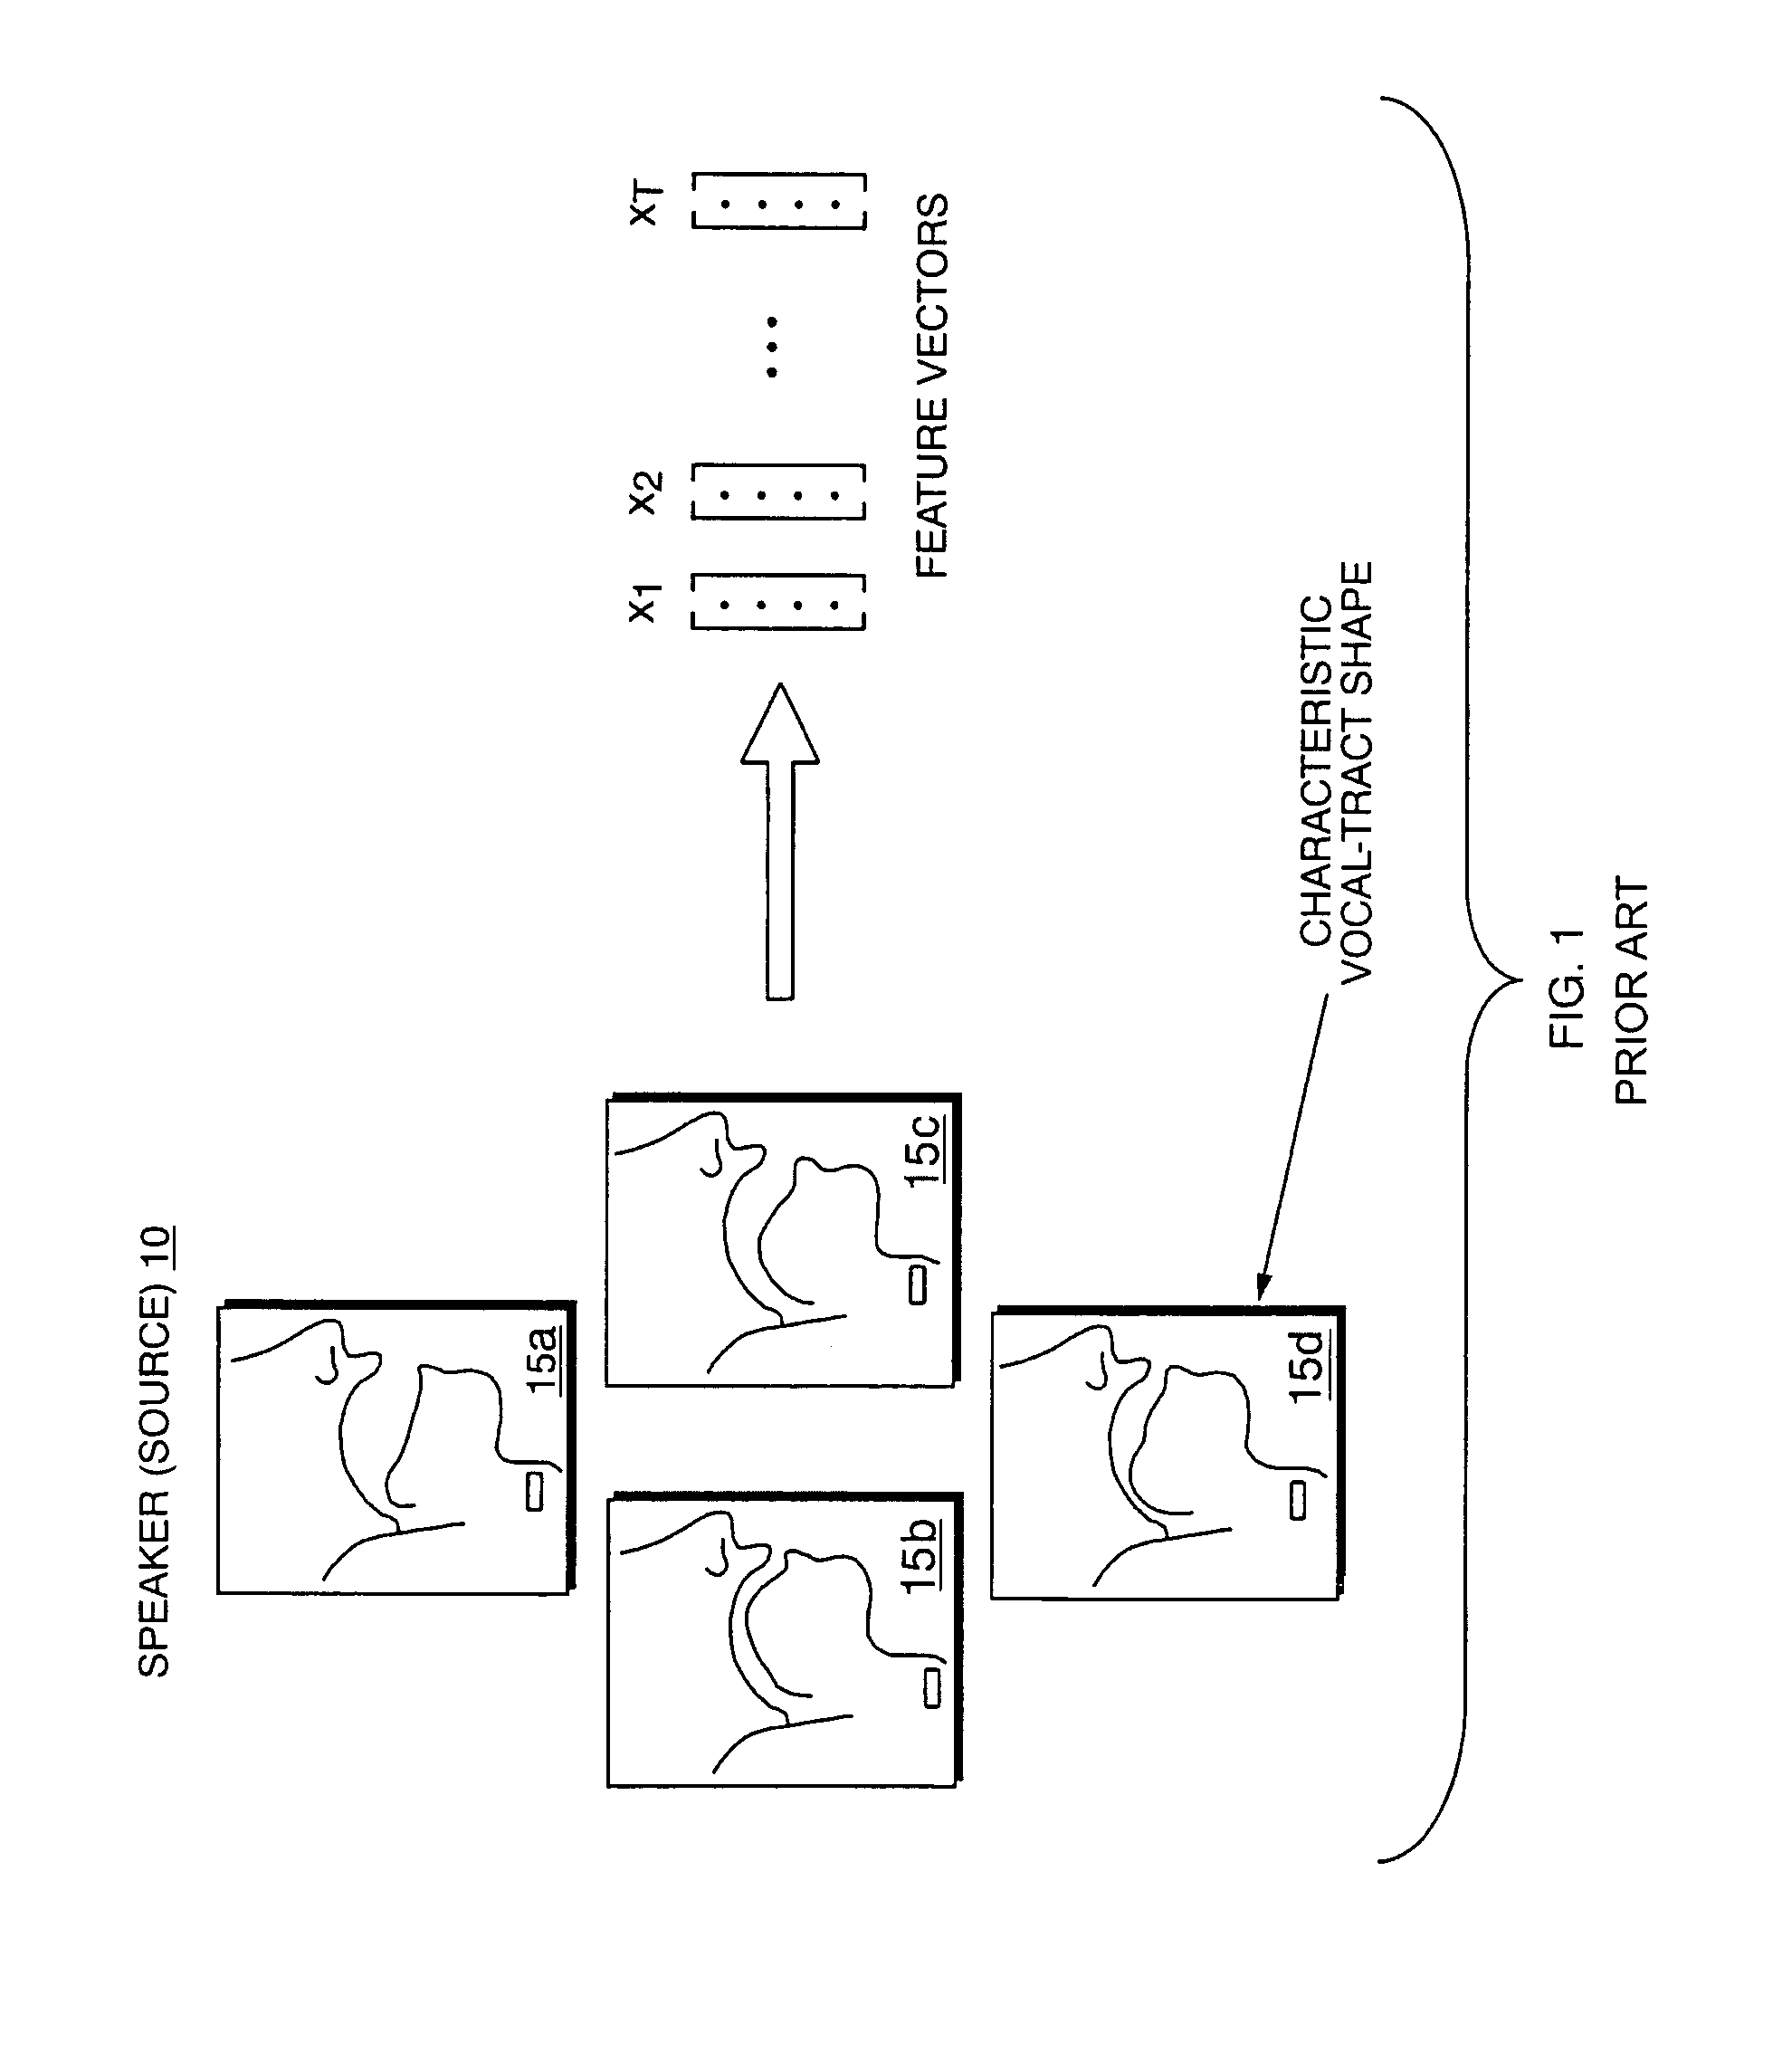 Method and apparatus for differential compression of speaker models